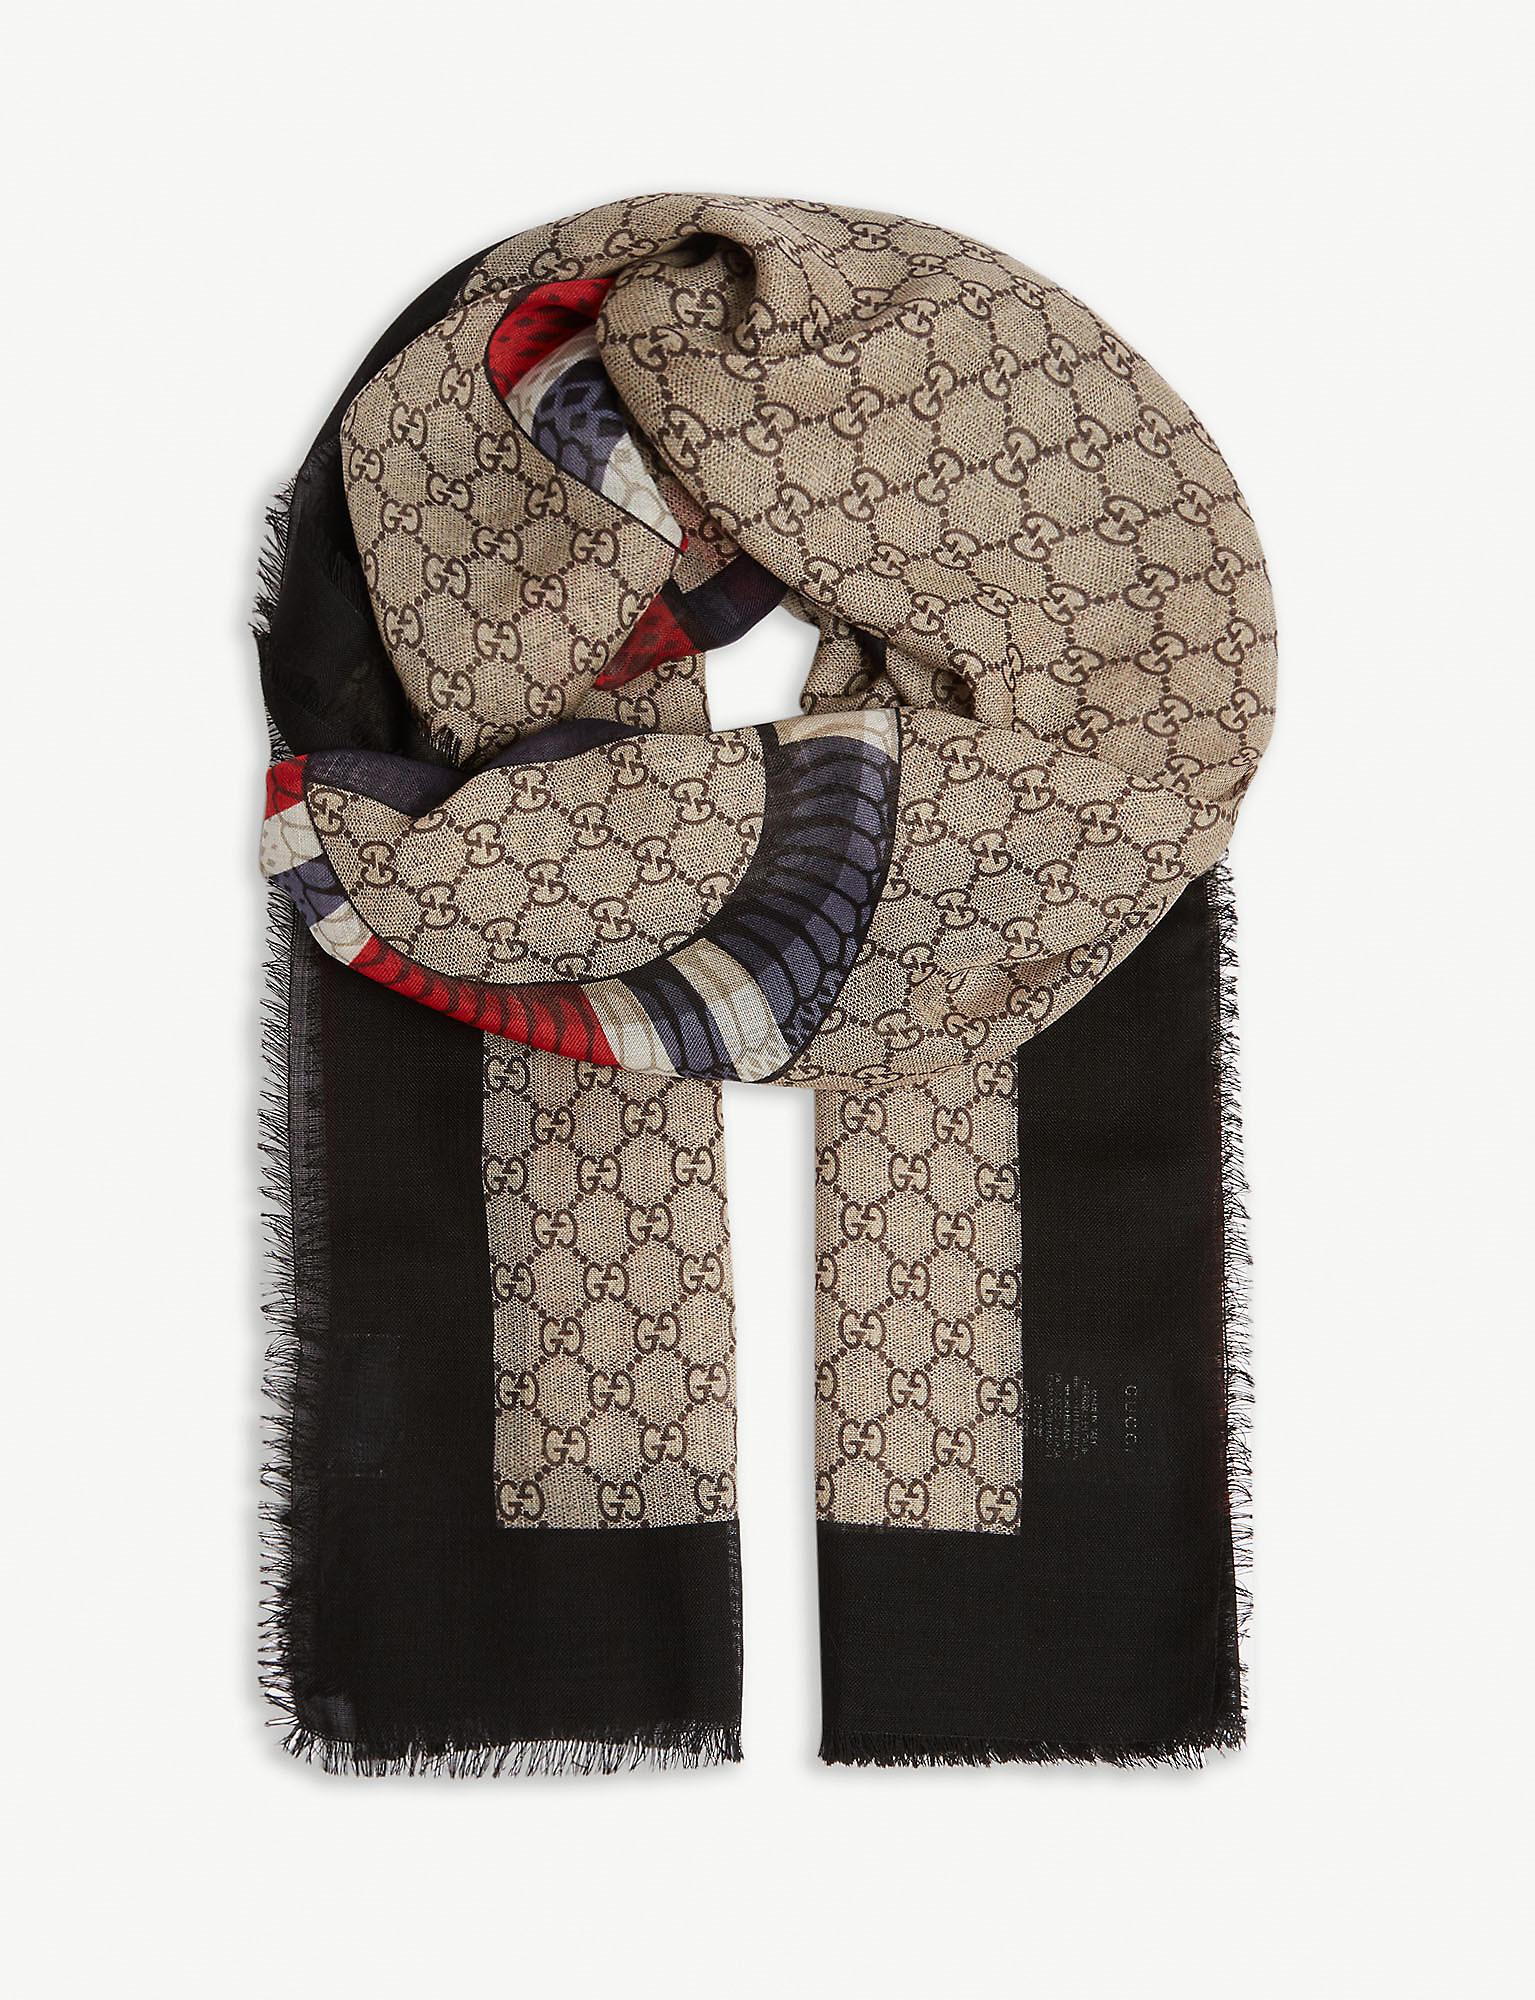 Gucci Wool Snake Print Scarf in Beige (Natural) for Men - Lyst